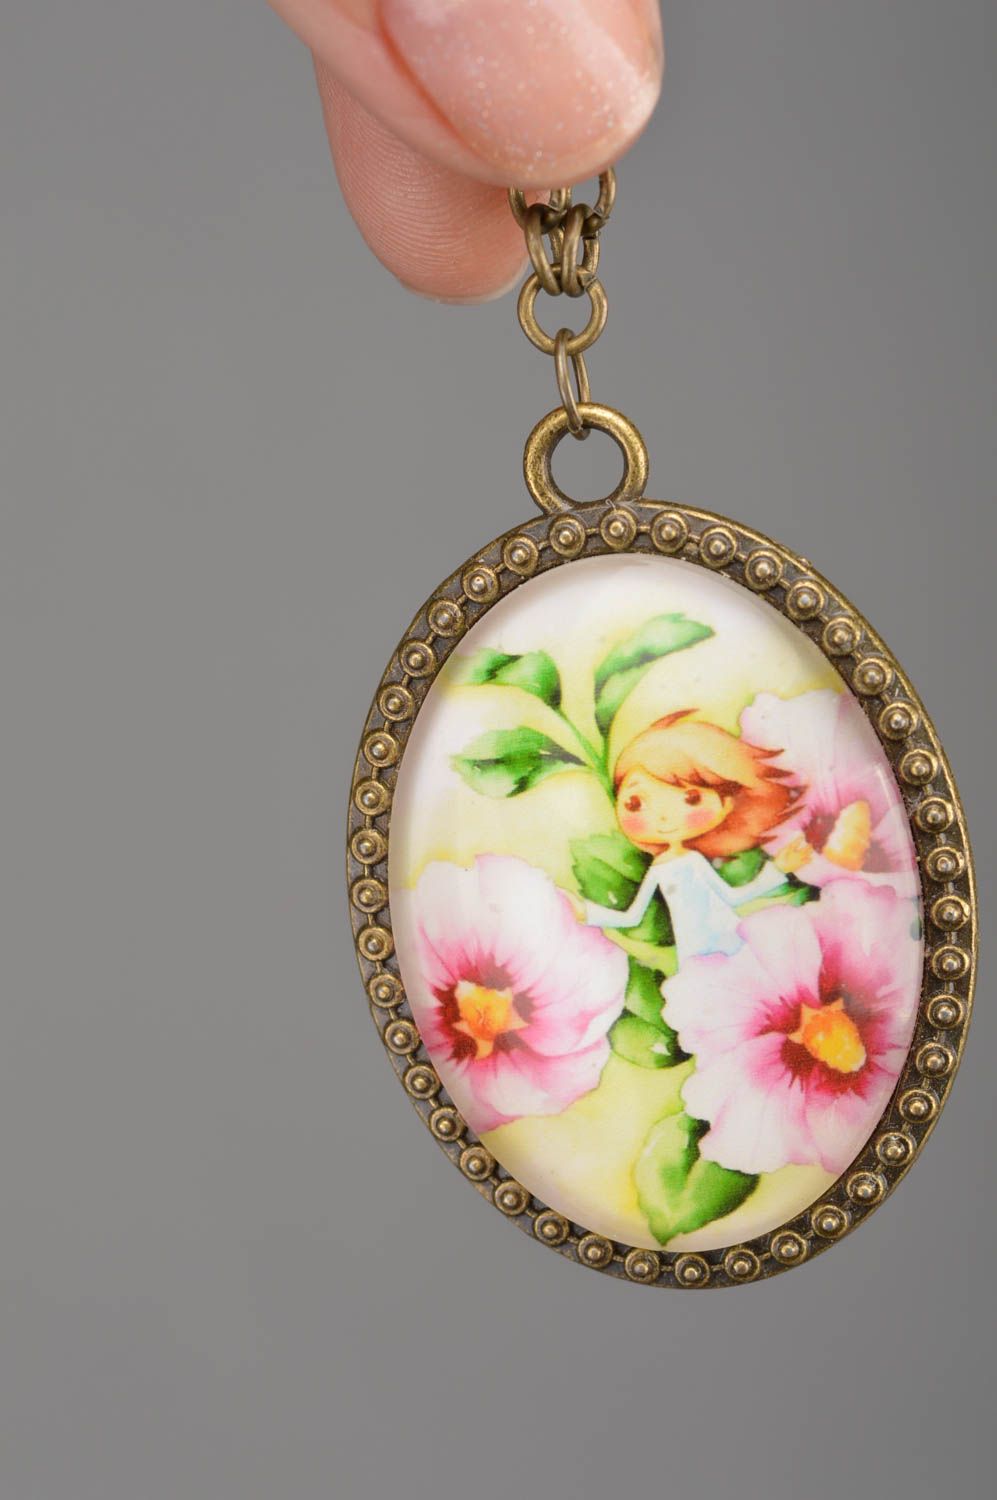 Handmade designer oval pendant on chain in vintage style with flowers  photo 3